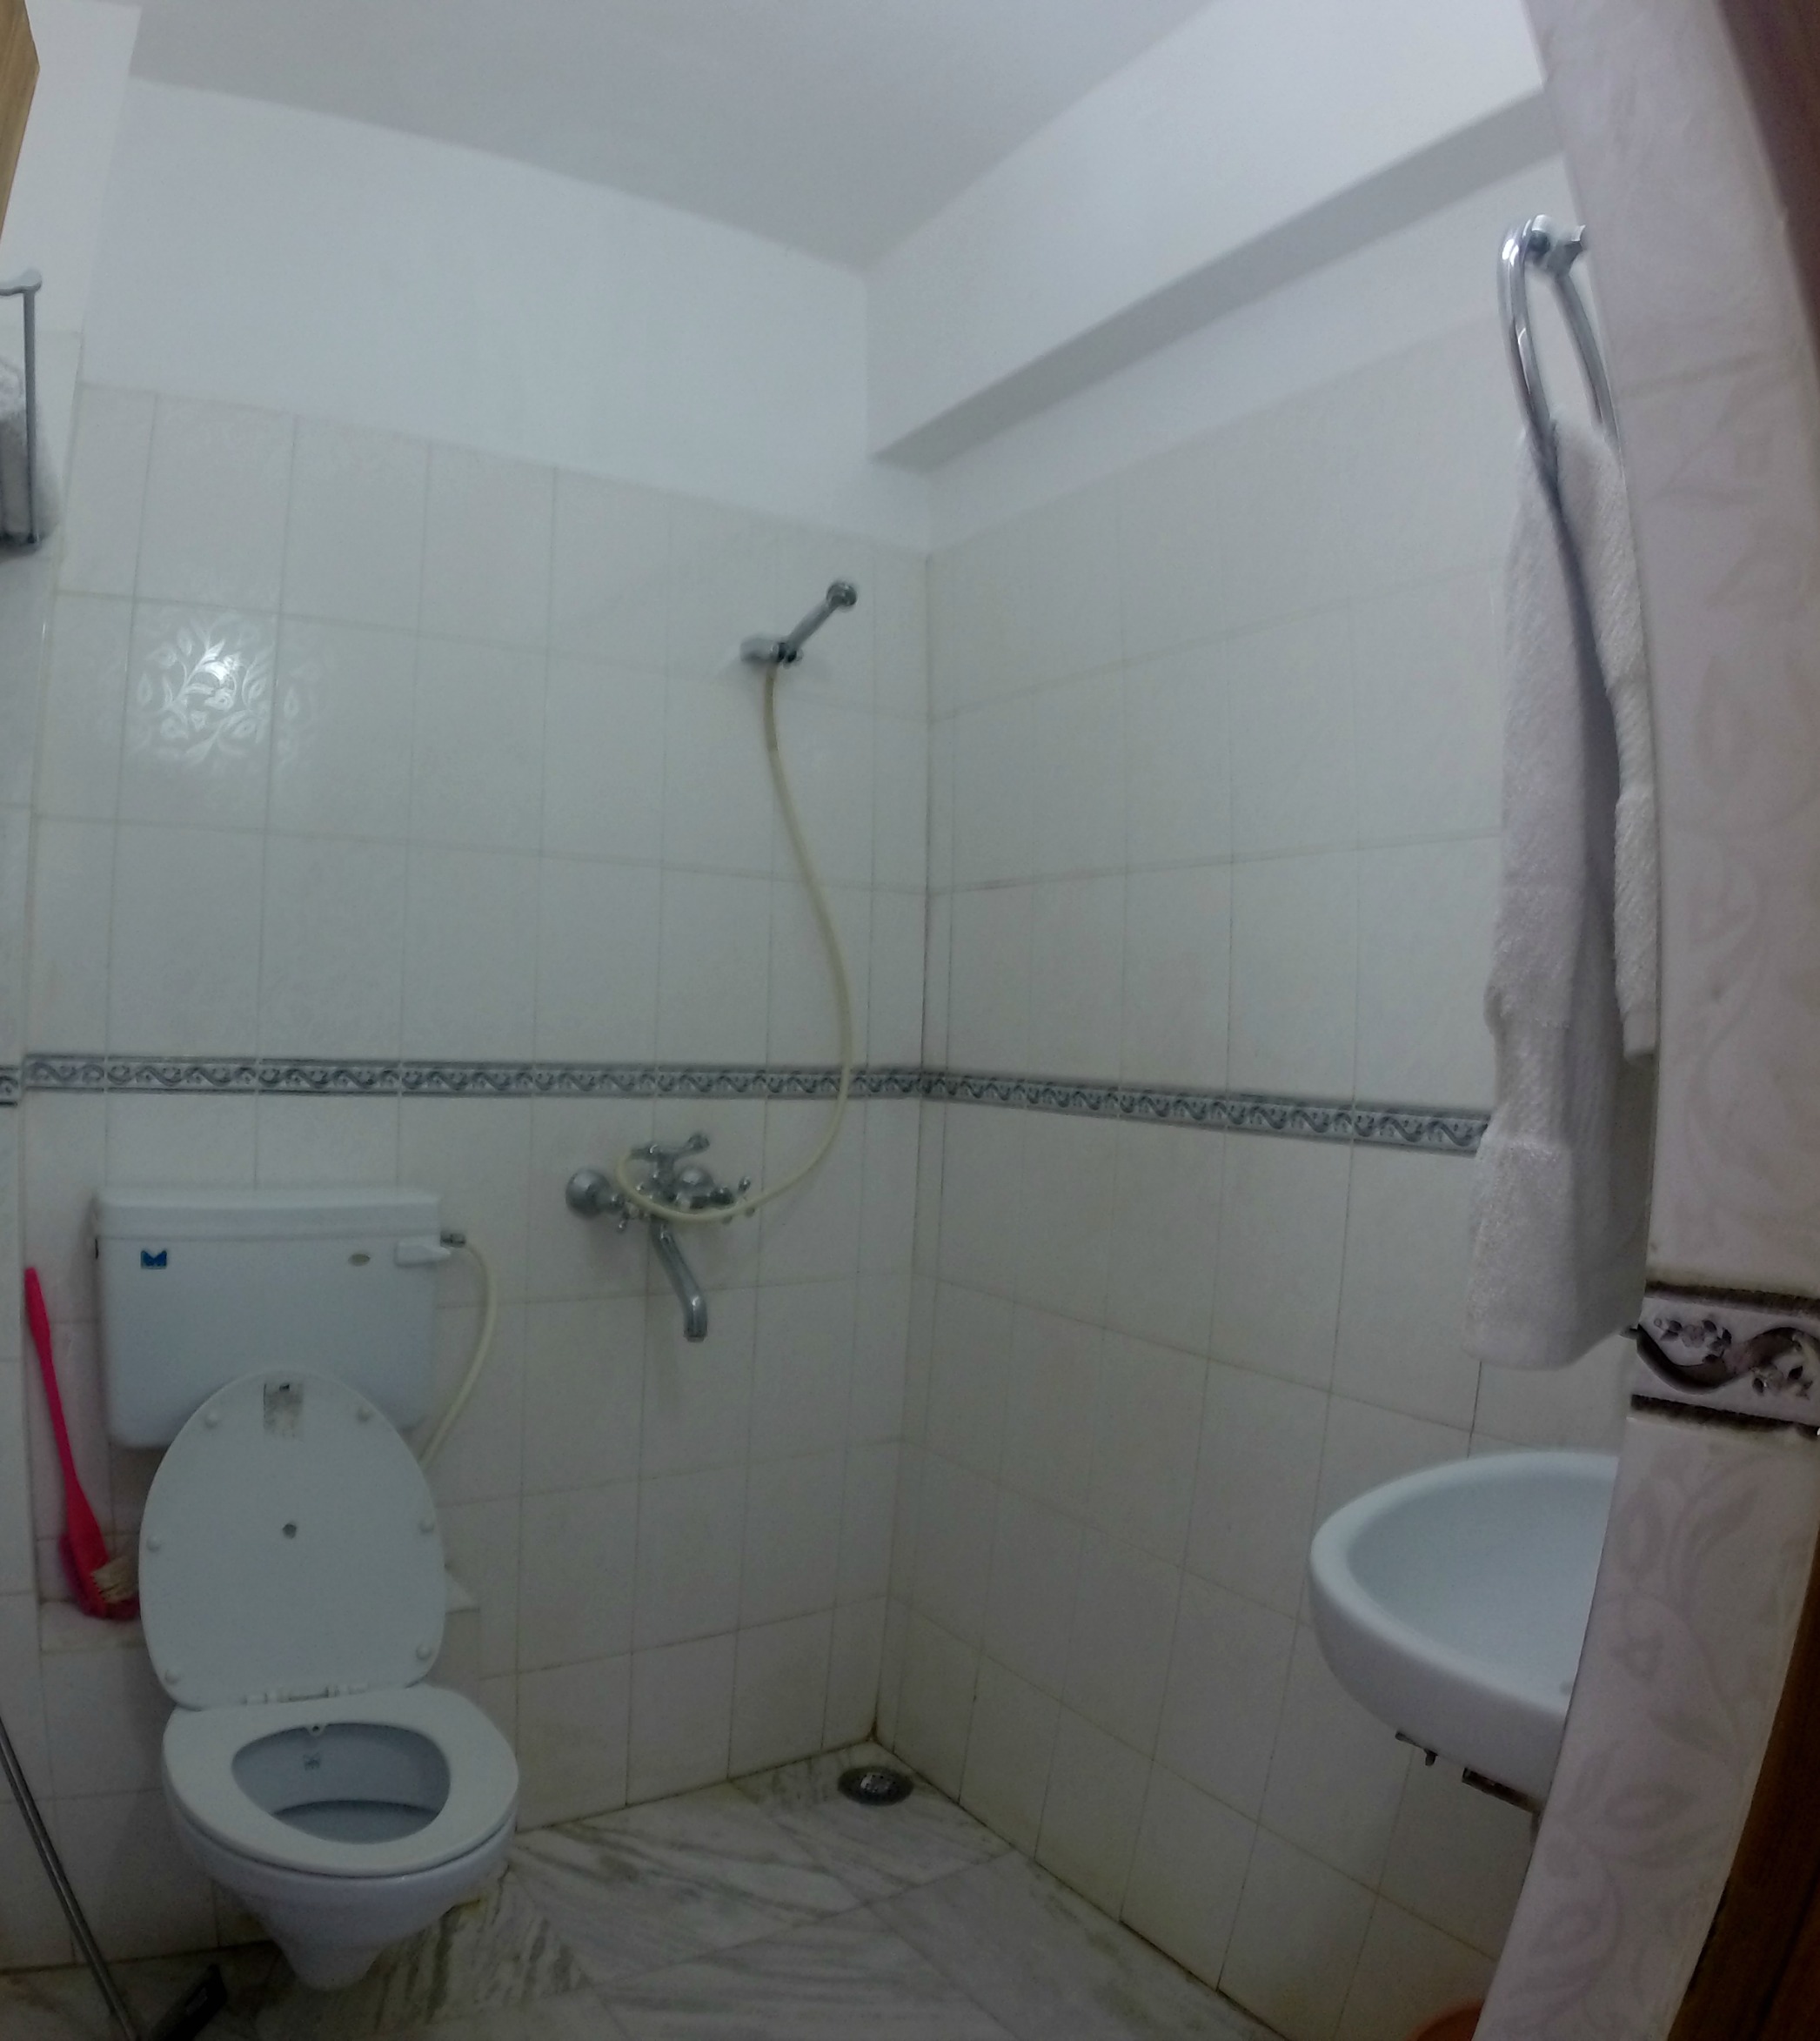 Budget Travel and Travel Hacking: What is a toilet shower you ask?? This. THIS is a toilet shower!